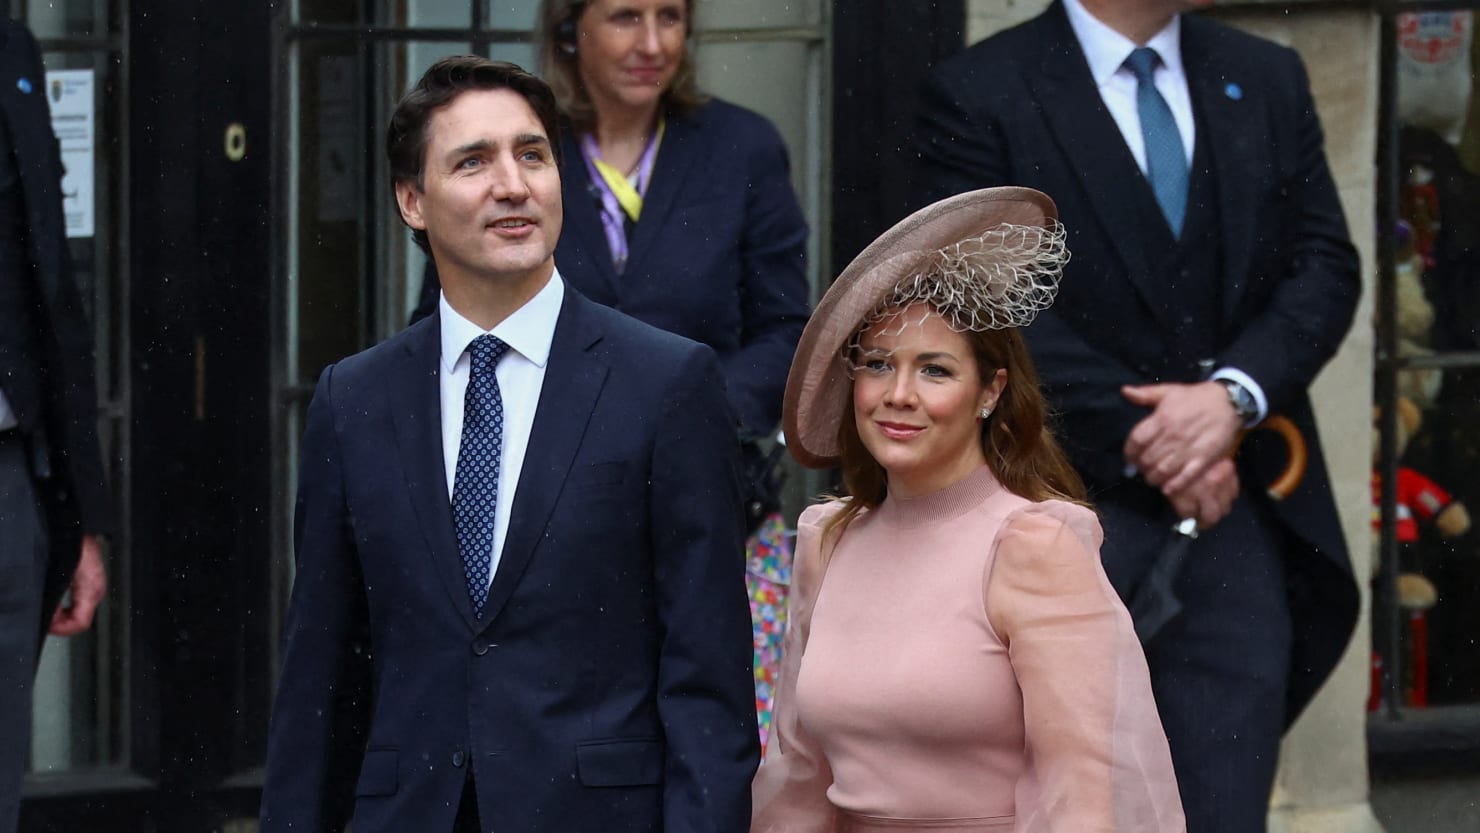 Canadian Prime Minister Justin Trudeau and His Wife Sophie Are Separating pic